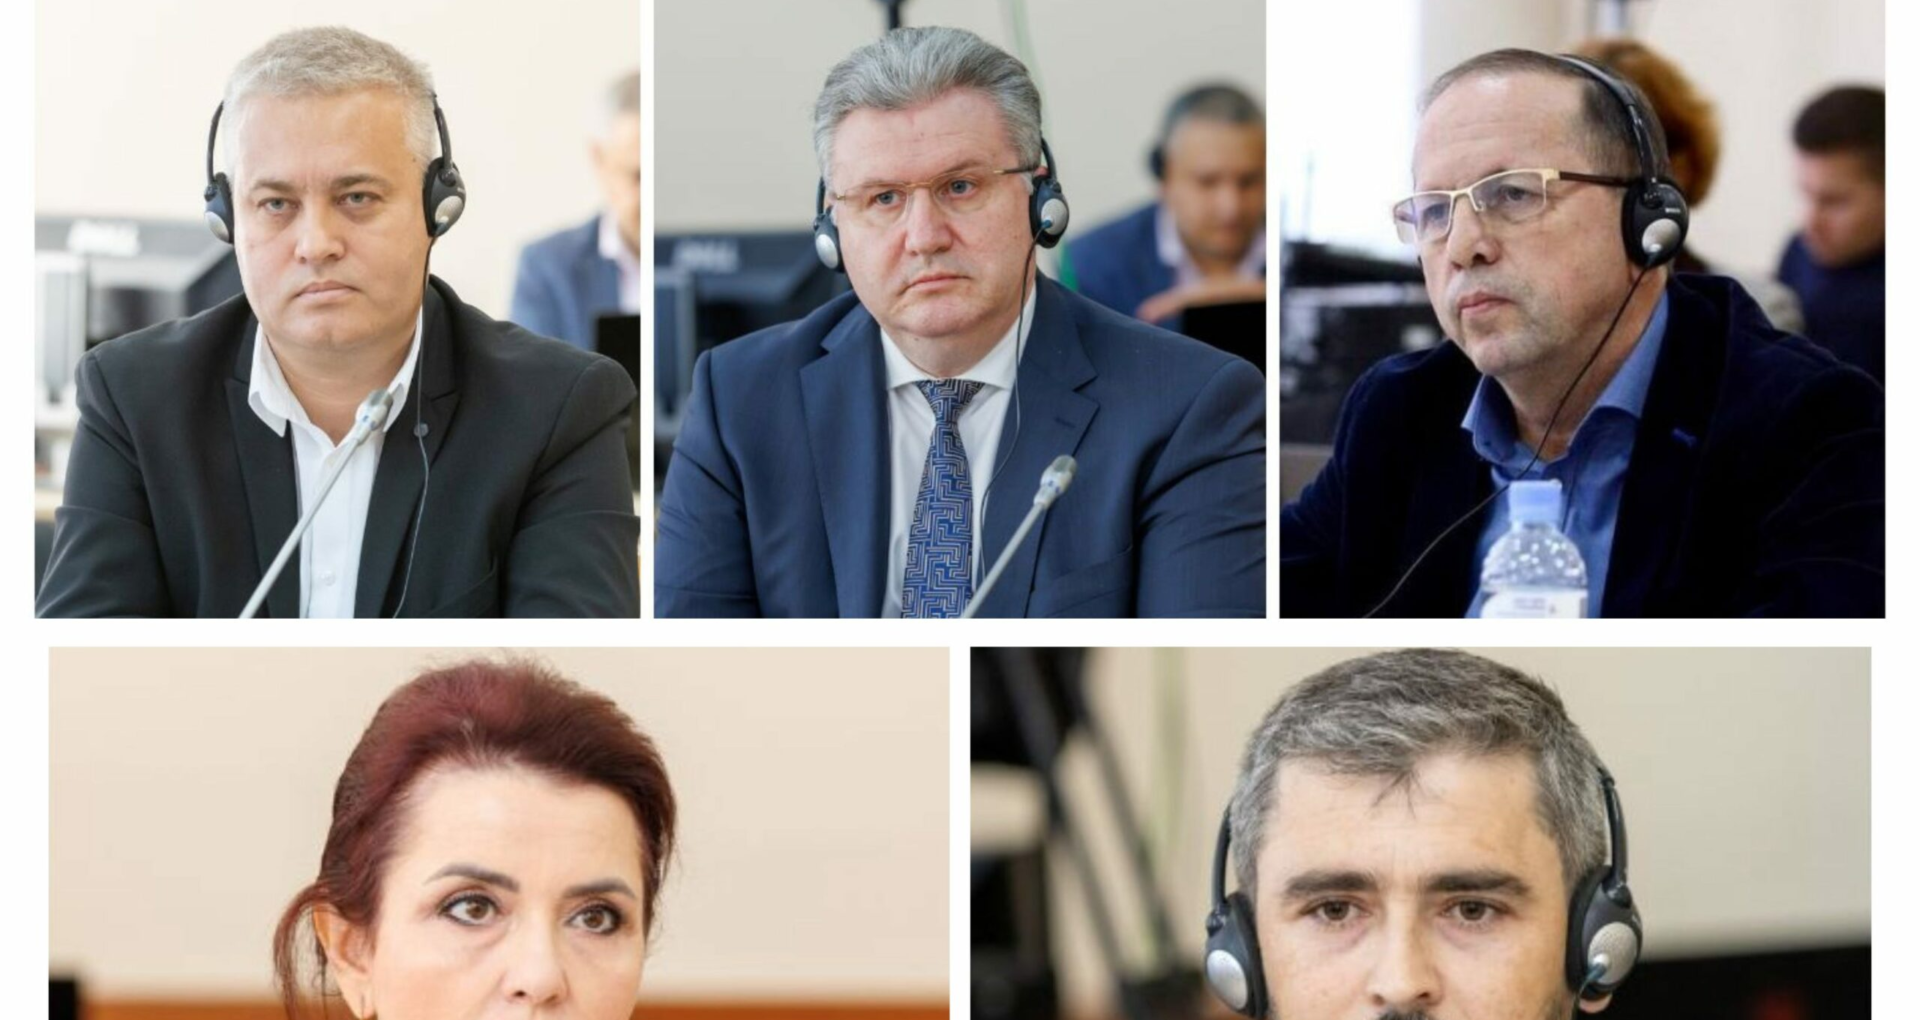 The prosecutor who ran for Head of the Anti-Corruption Prosecutor’s Office has asked for a replacement for him as head of the prosecution group in the “bank fraud” case